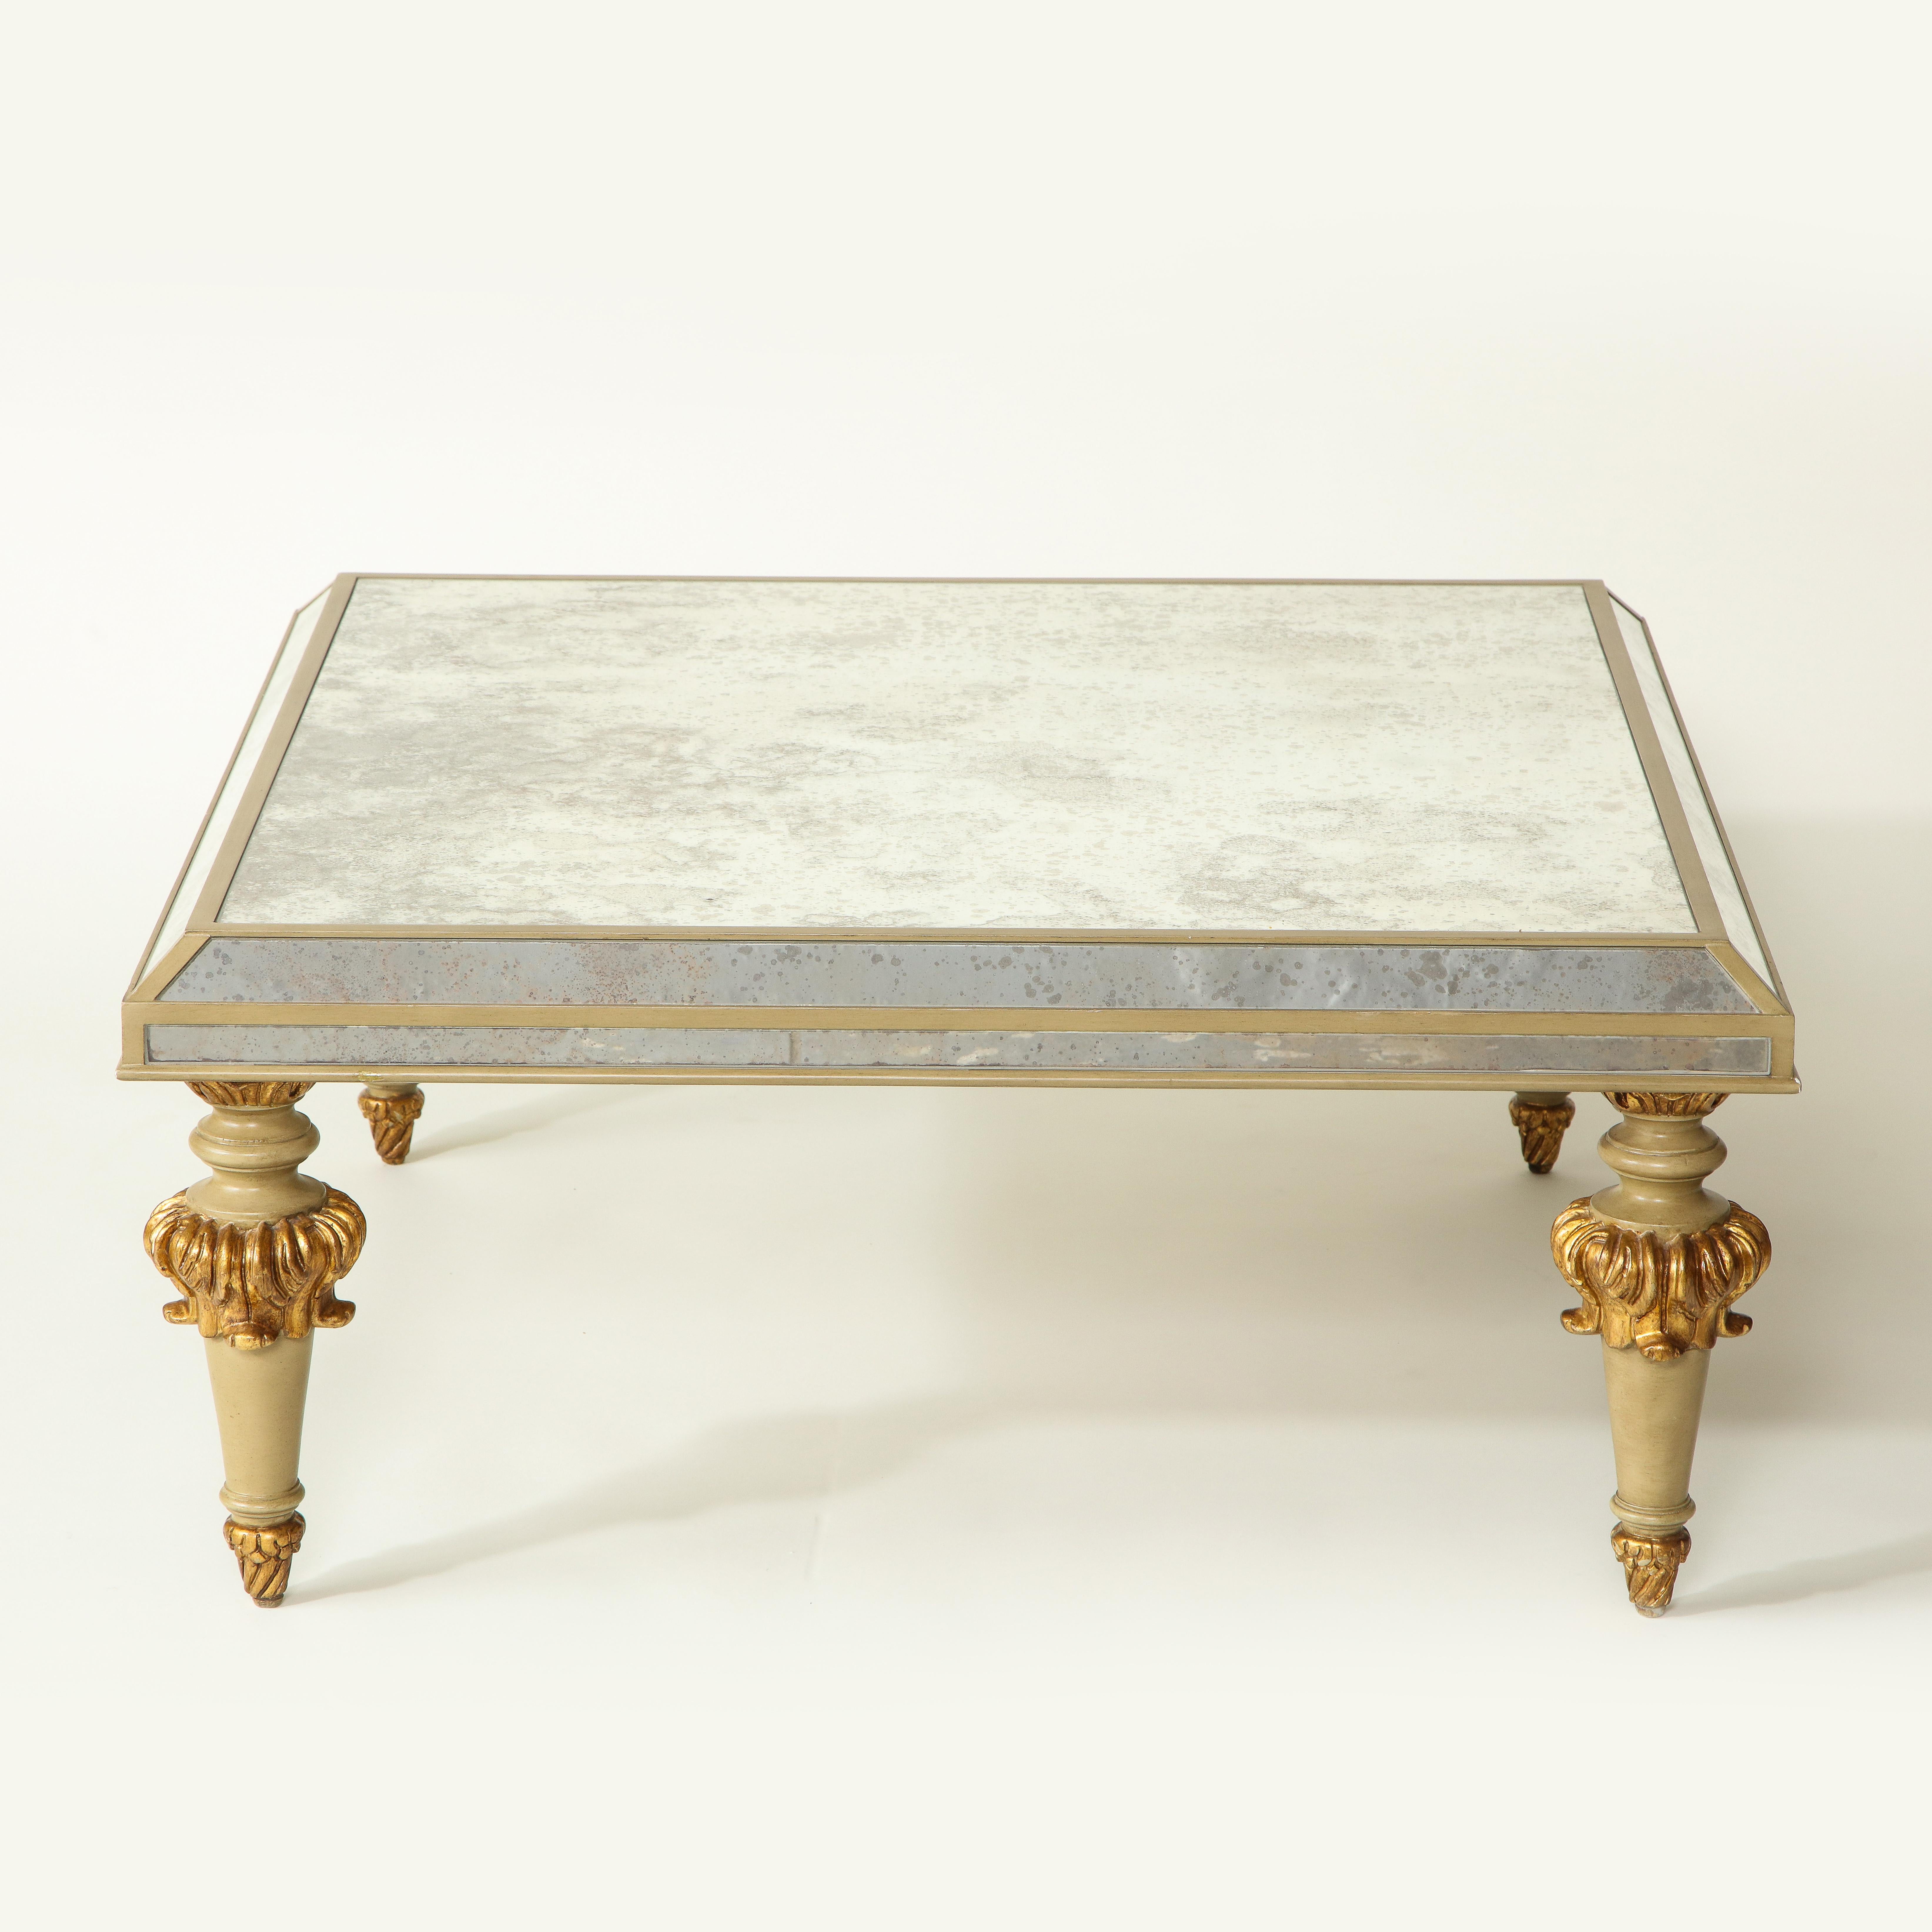 The antiqued mirrored top with mirrored border glass edges raised on greige-painted tapering legs carved with gilt acanthus leaves.